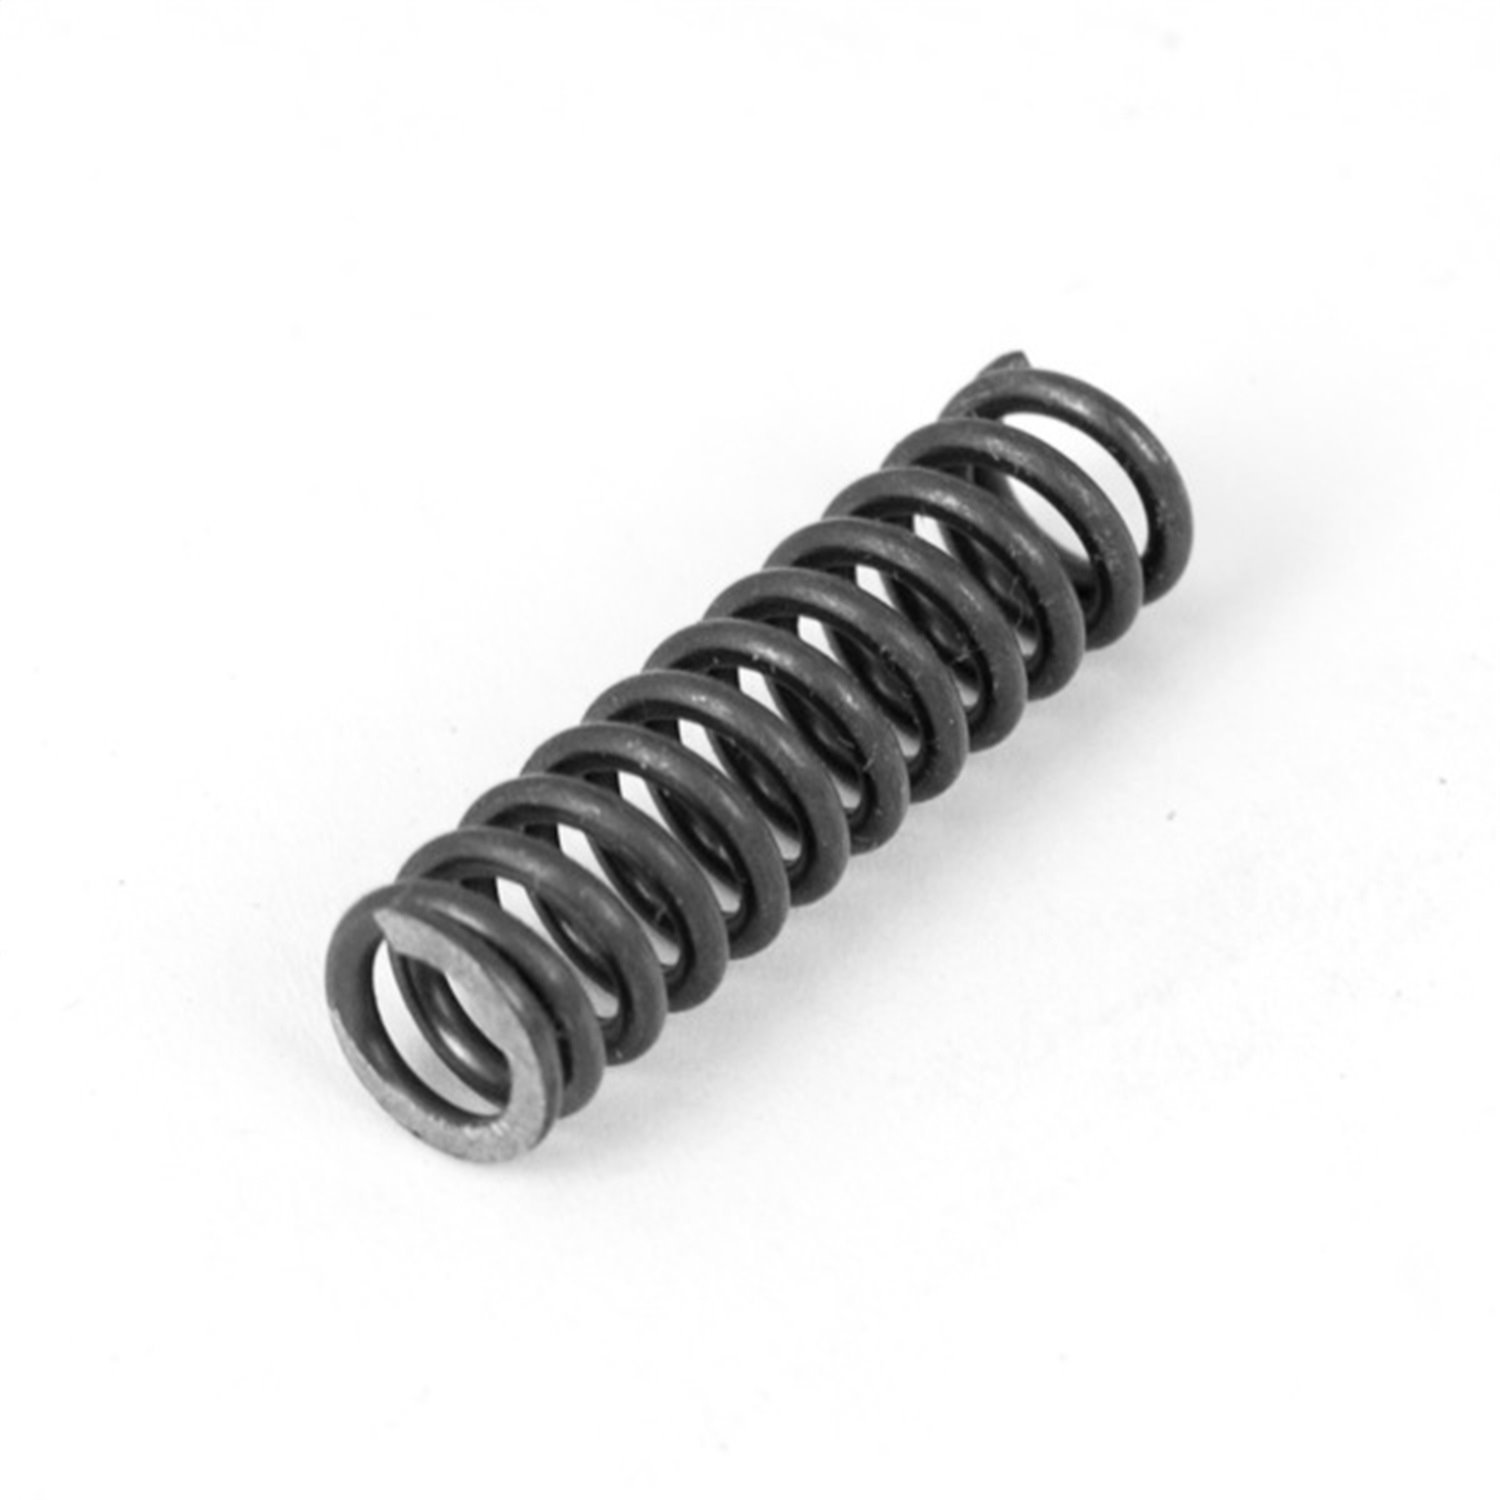 Compression Detent Spring AX5 and AX15 Transmission Jeep Wrangler YJ 87-95 TJ 97-02 Cherokee XJ 84-01